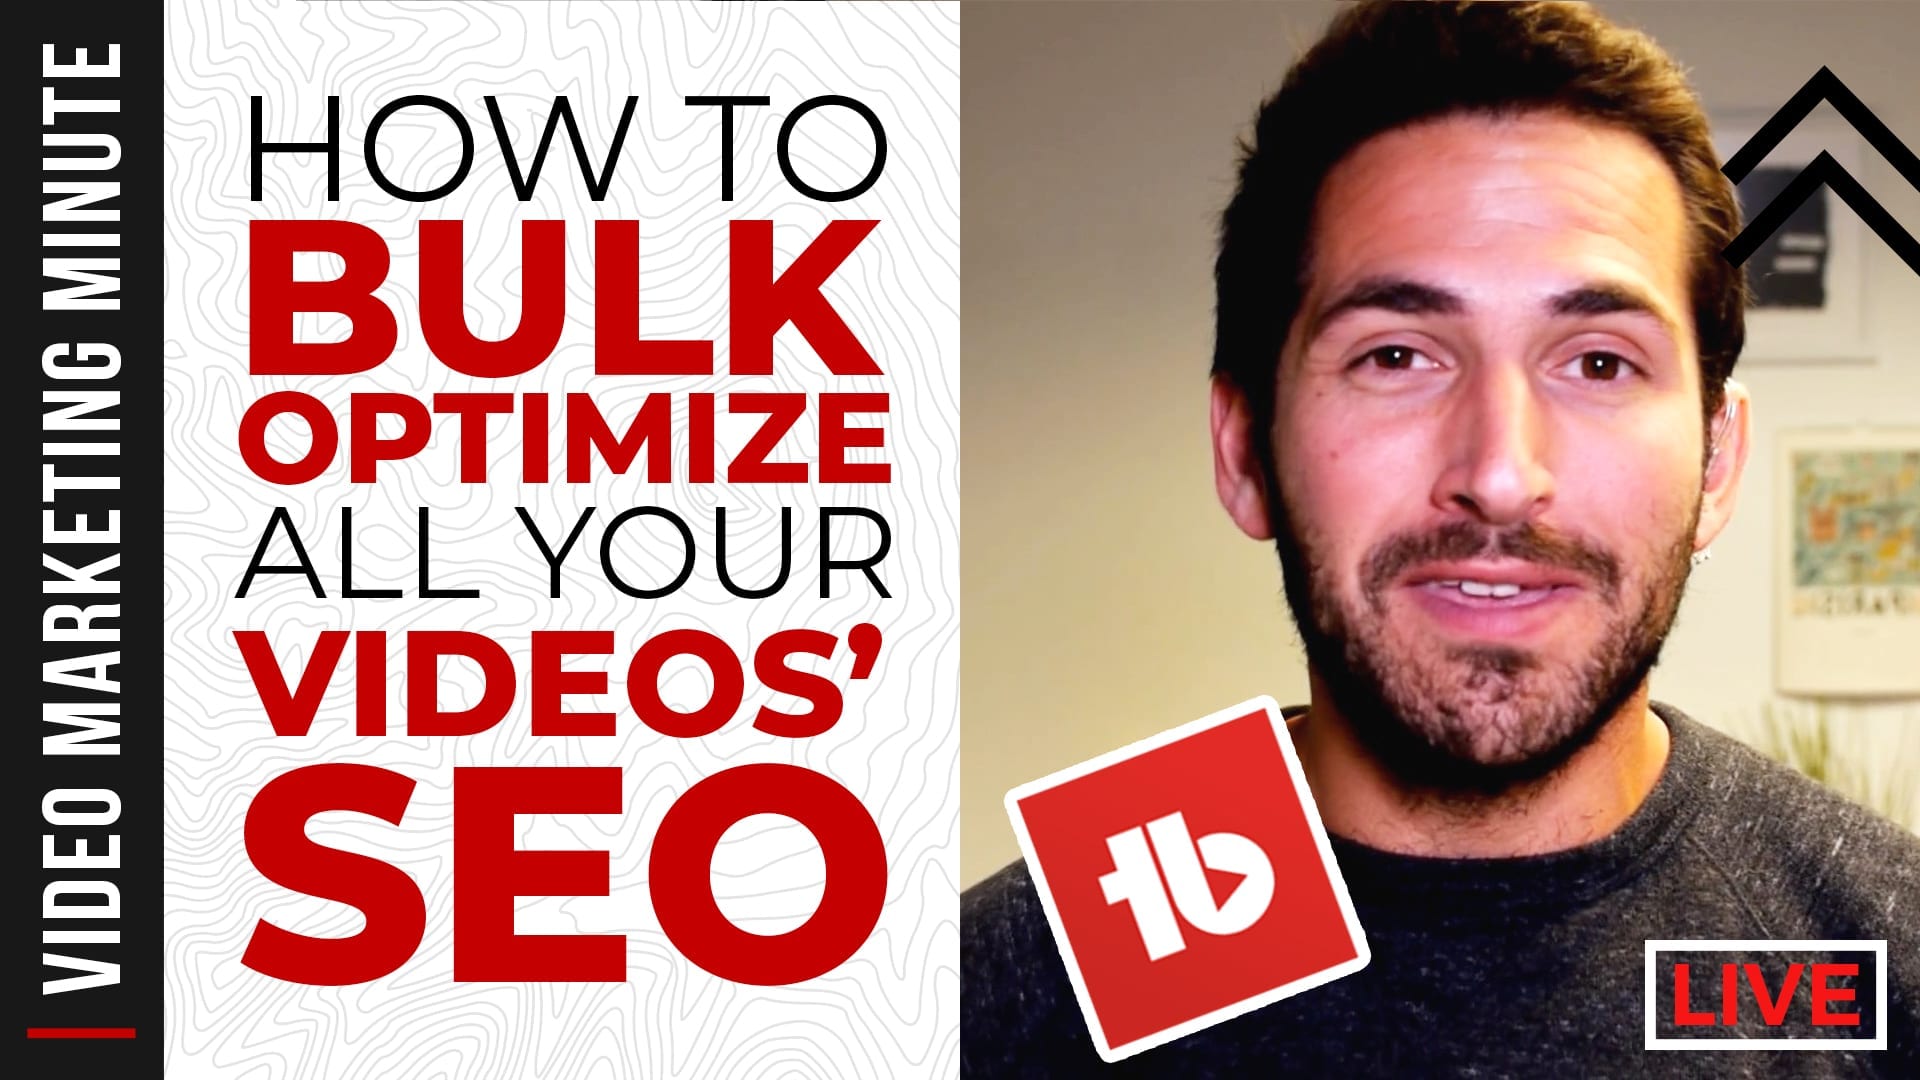 How to Bulk Optimize All Your Videos SEO